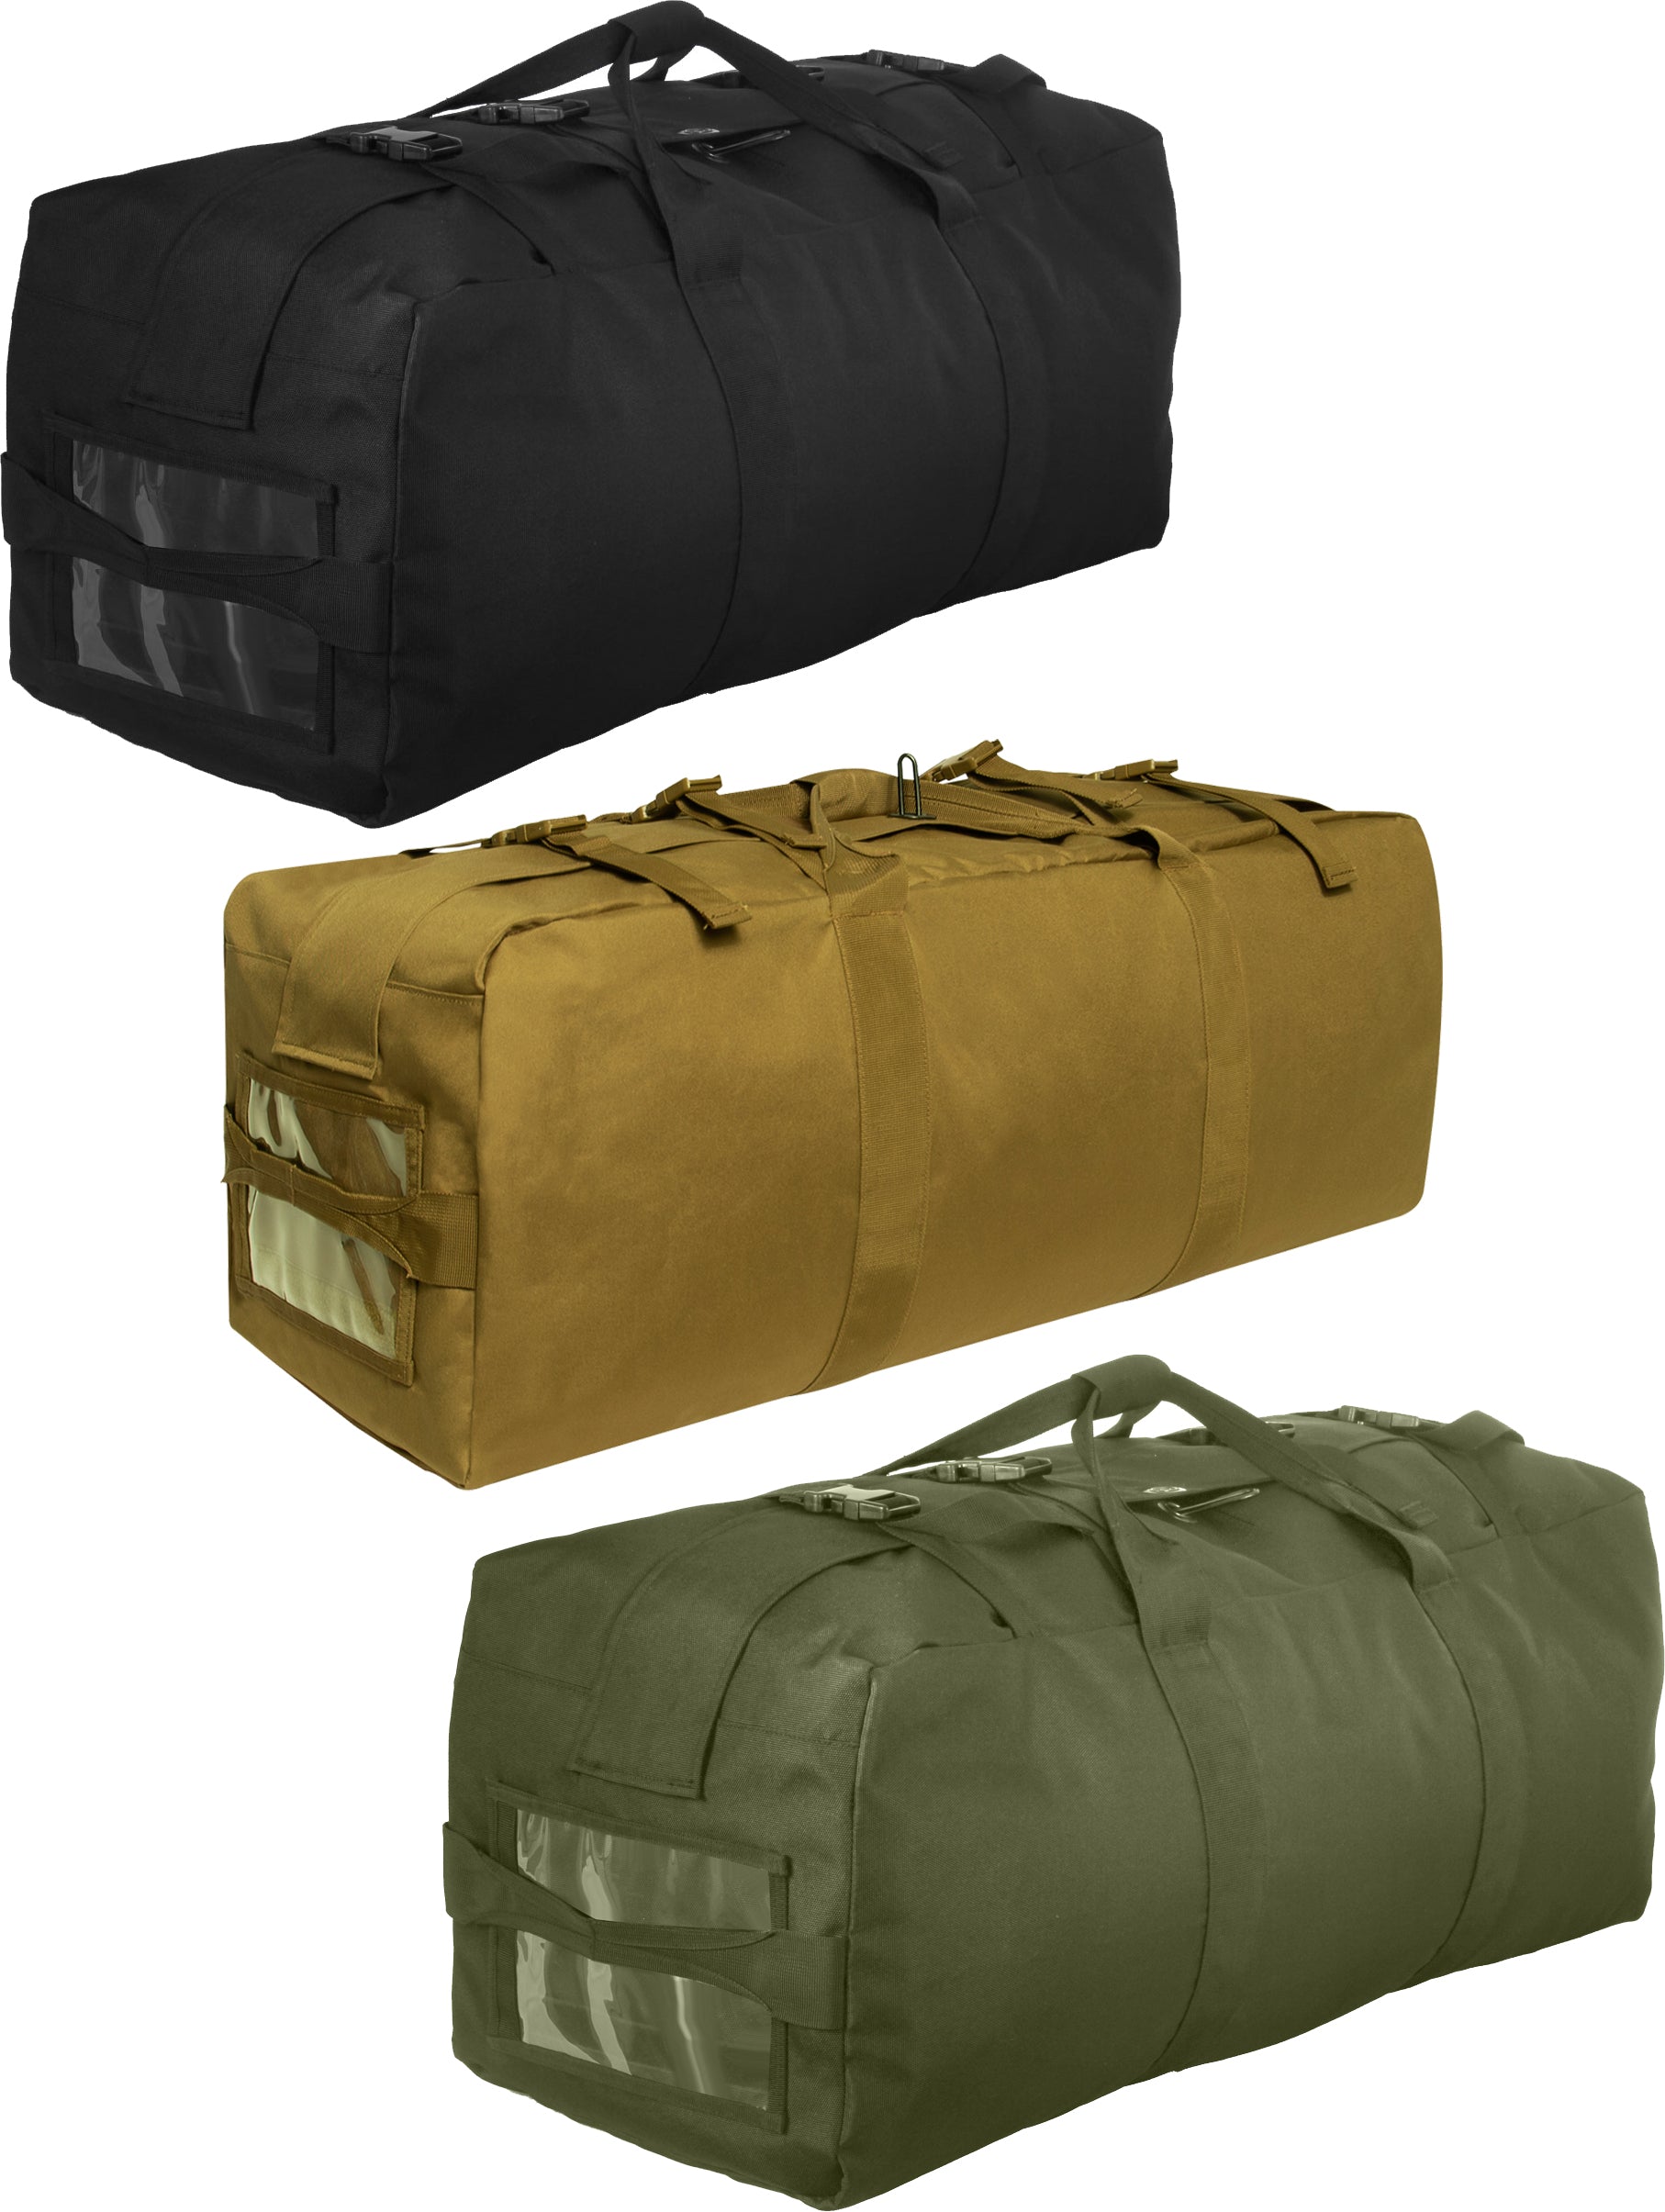 Rothco GI Type Cordura 2 Strap Duffel Bag (Not Government Issue)